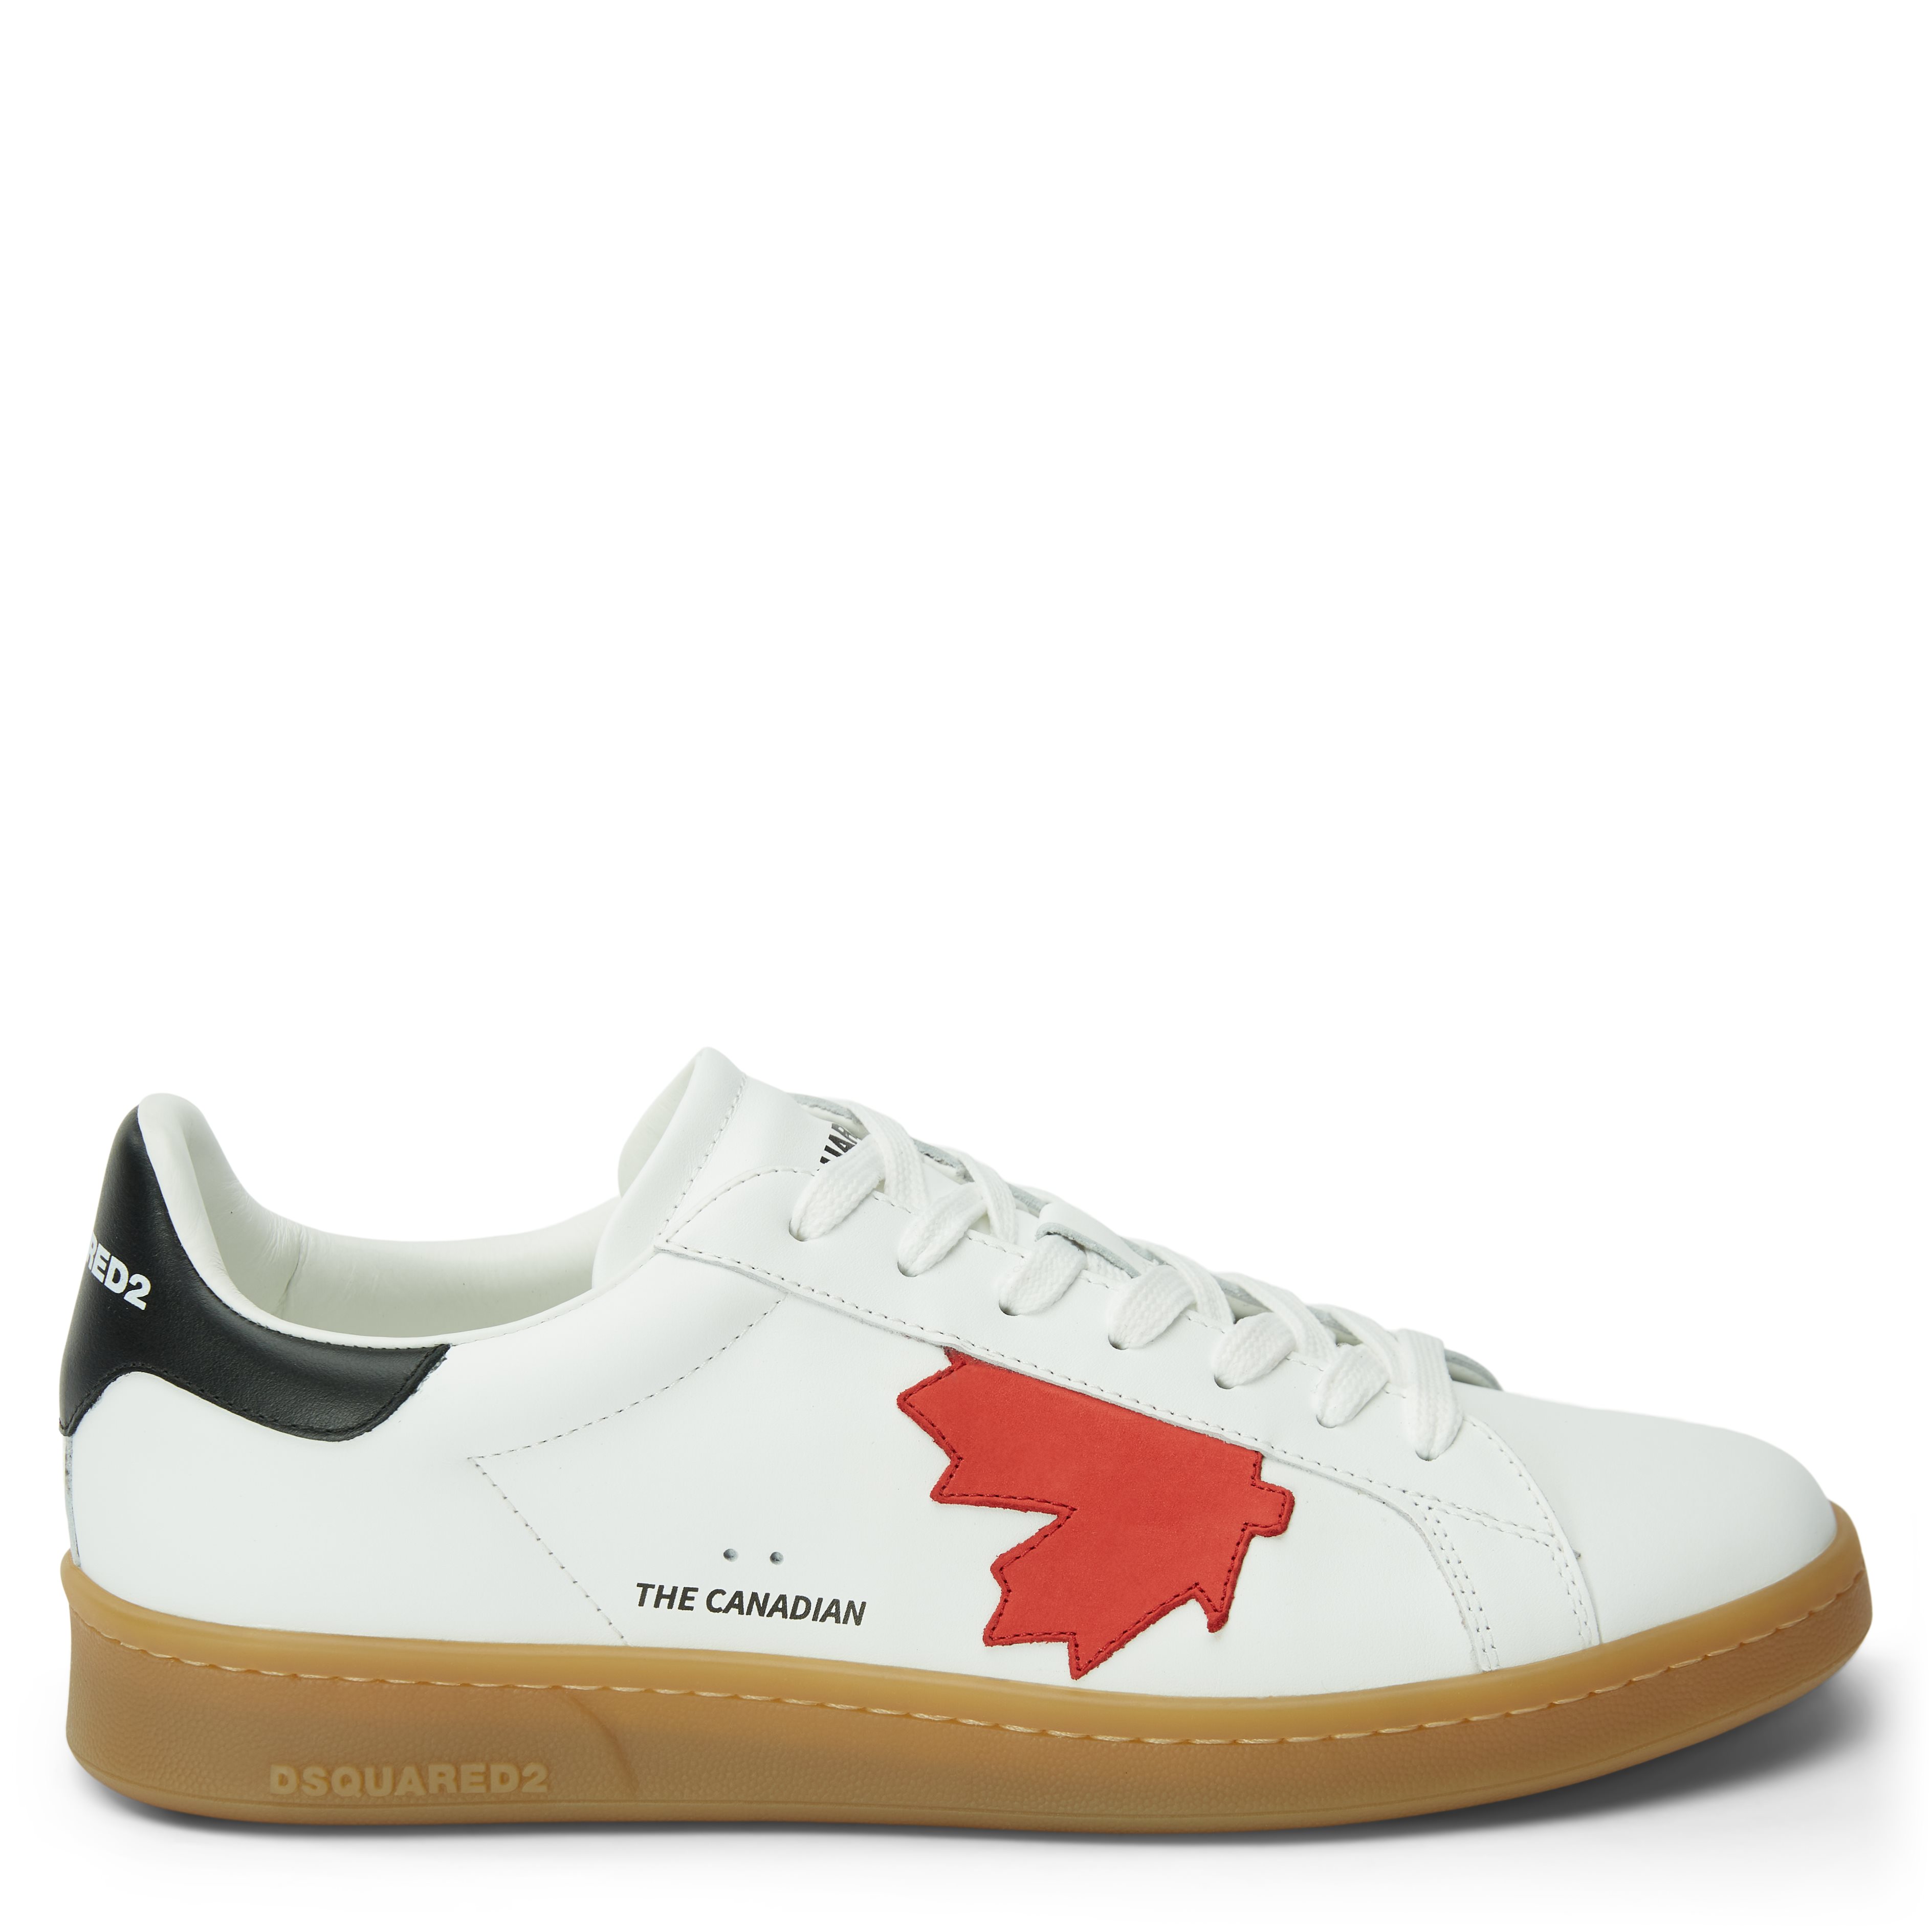 Dsquared2 Shoes SNM0174 01500001 White